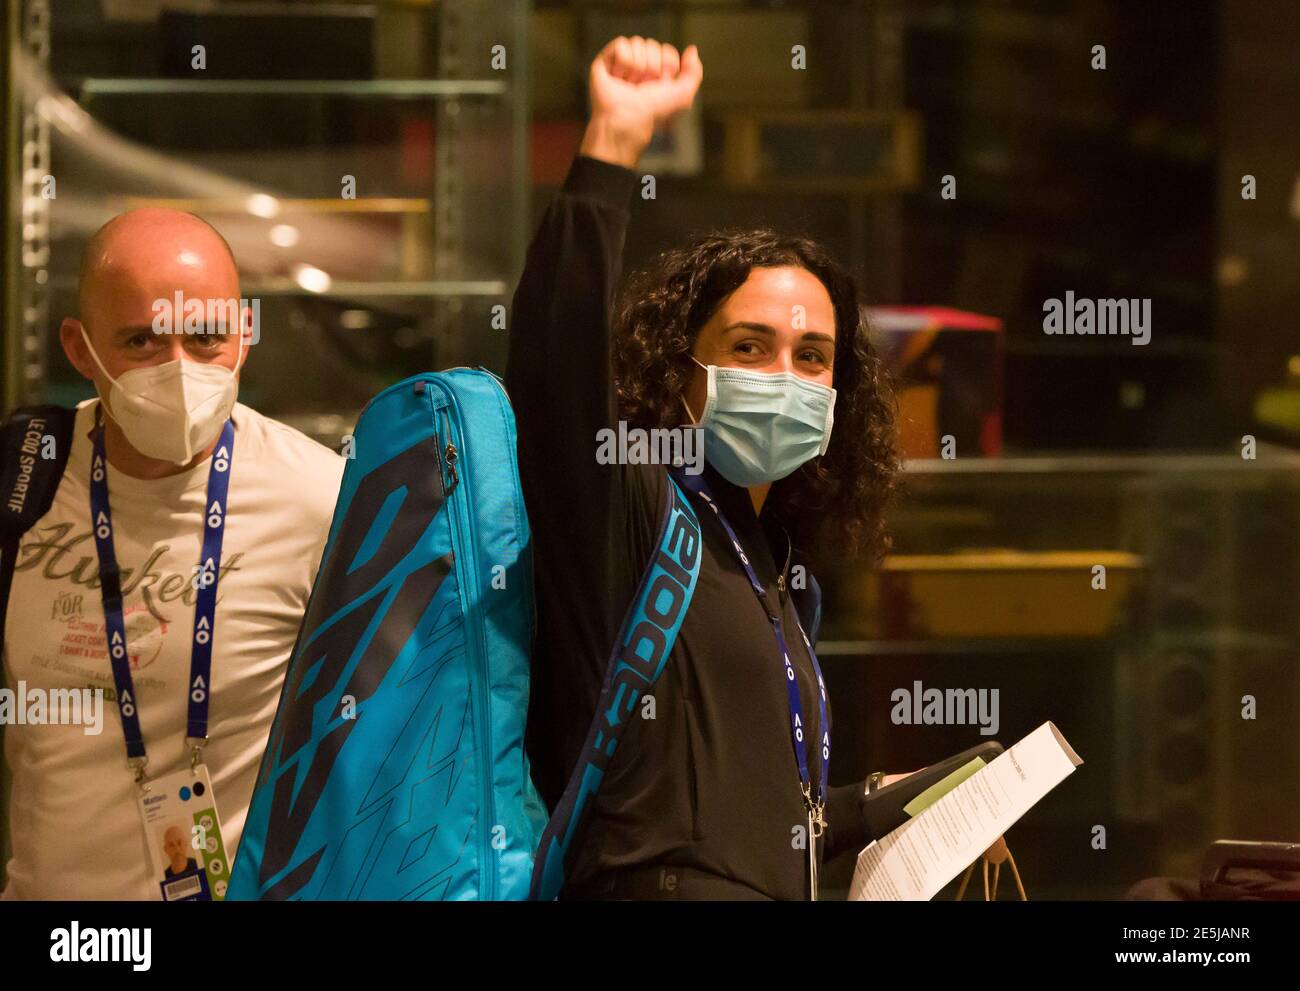 January 28, 2021: Martina Trevisan (ITA) and her coach Matteo Cartarsi  leave the Hyatt Hotel in Melbourne after serving a 14 day quarantine ahead  of the Australian Open 2021 in Melbourne, Australia.